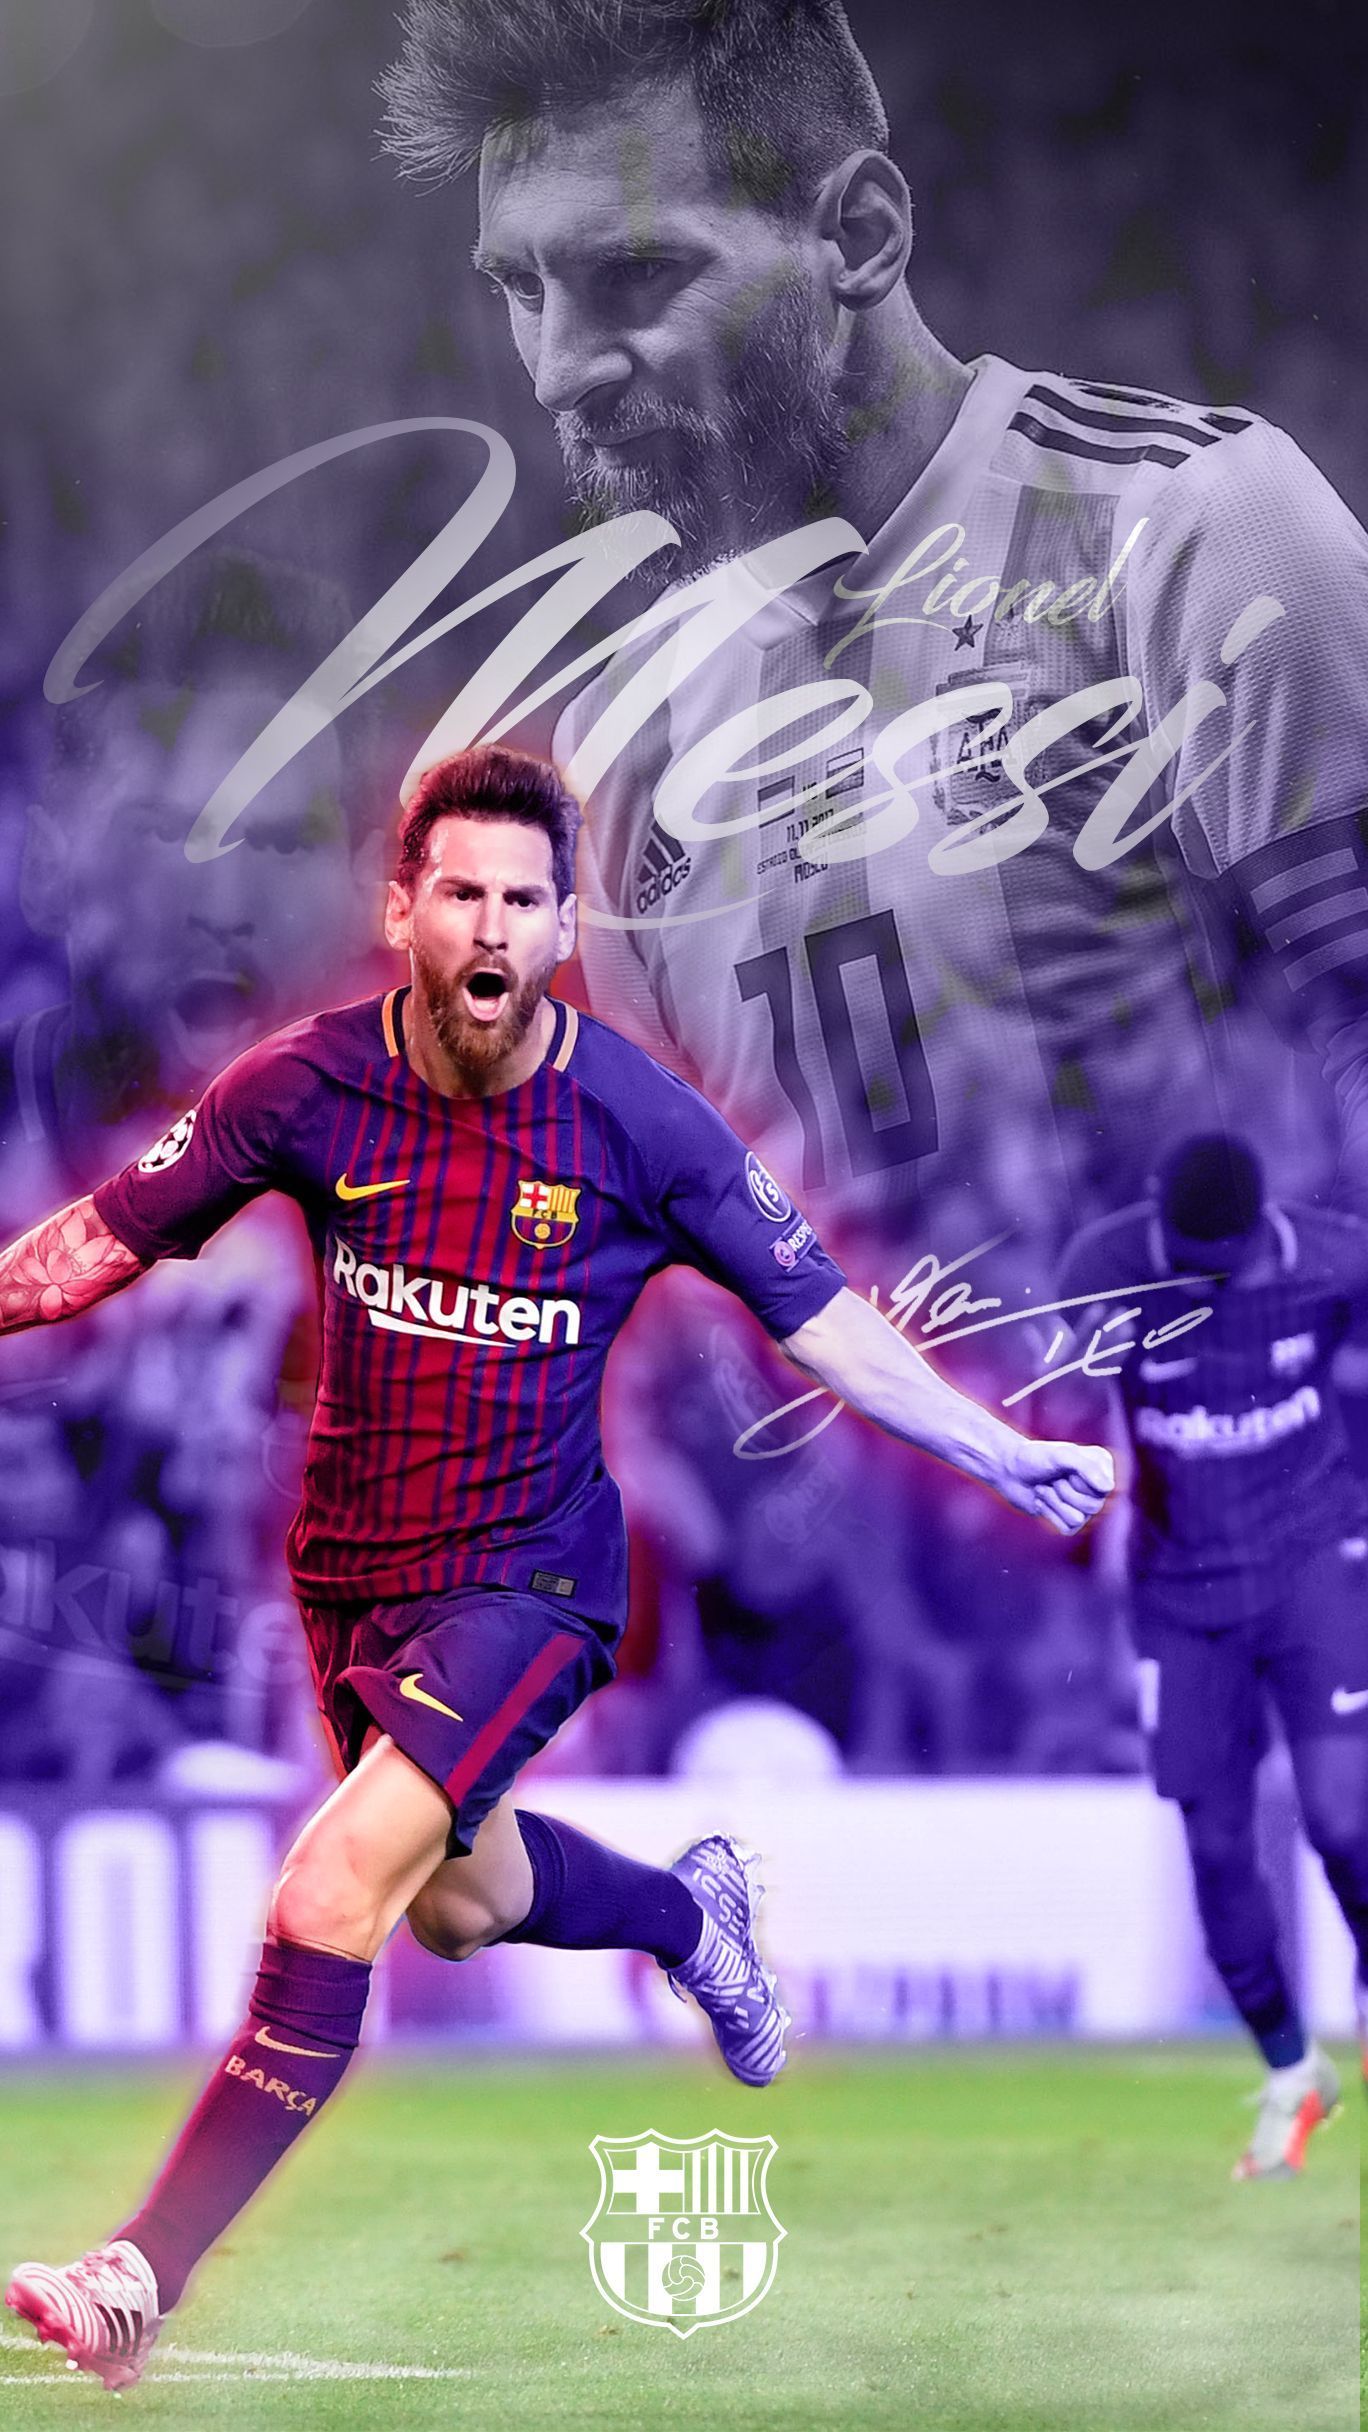 LIONEL MESSI WALLPAPERS